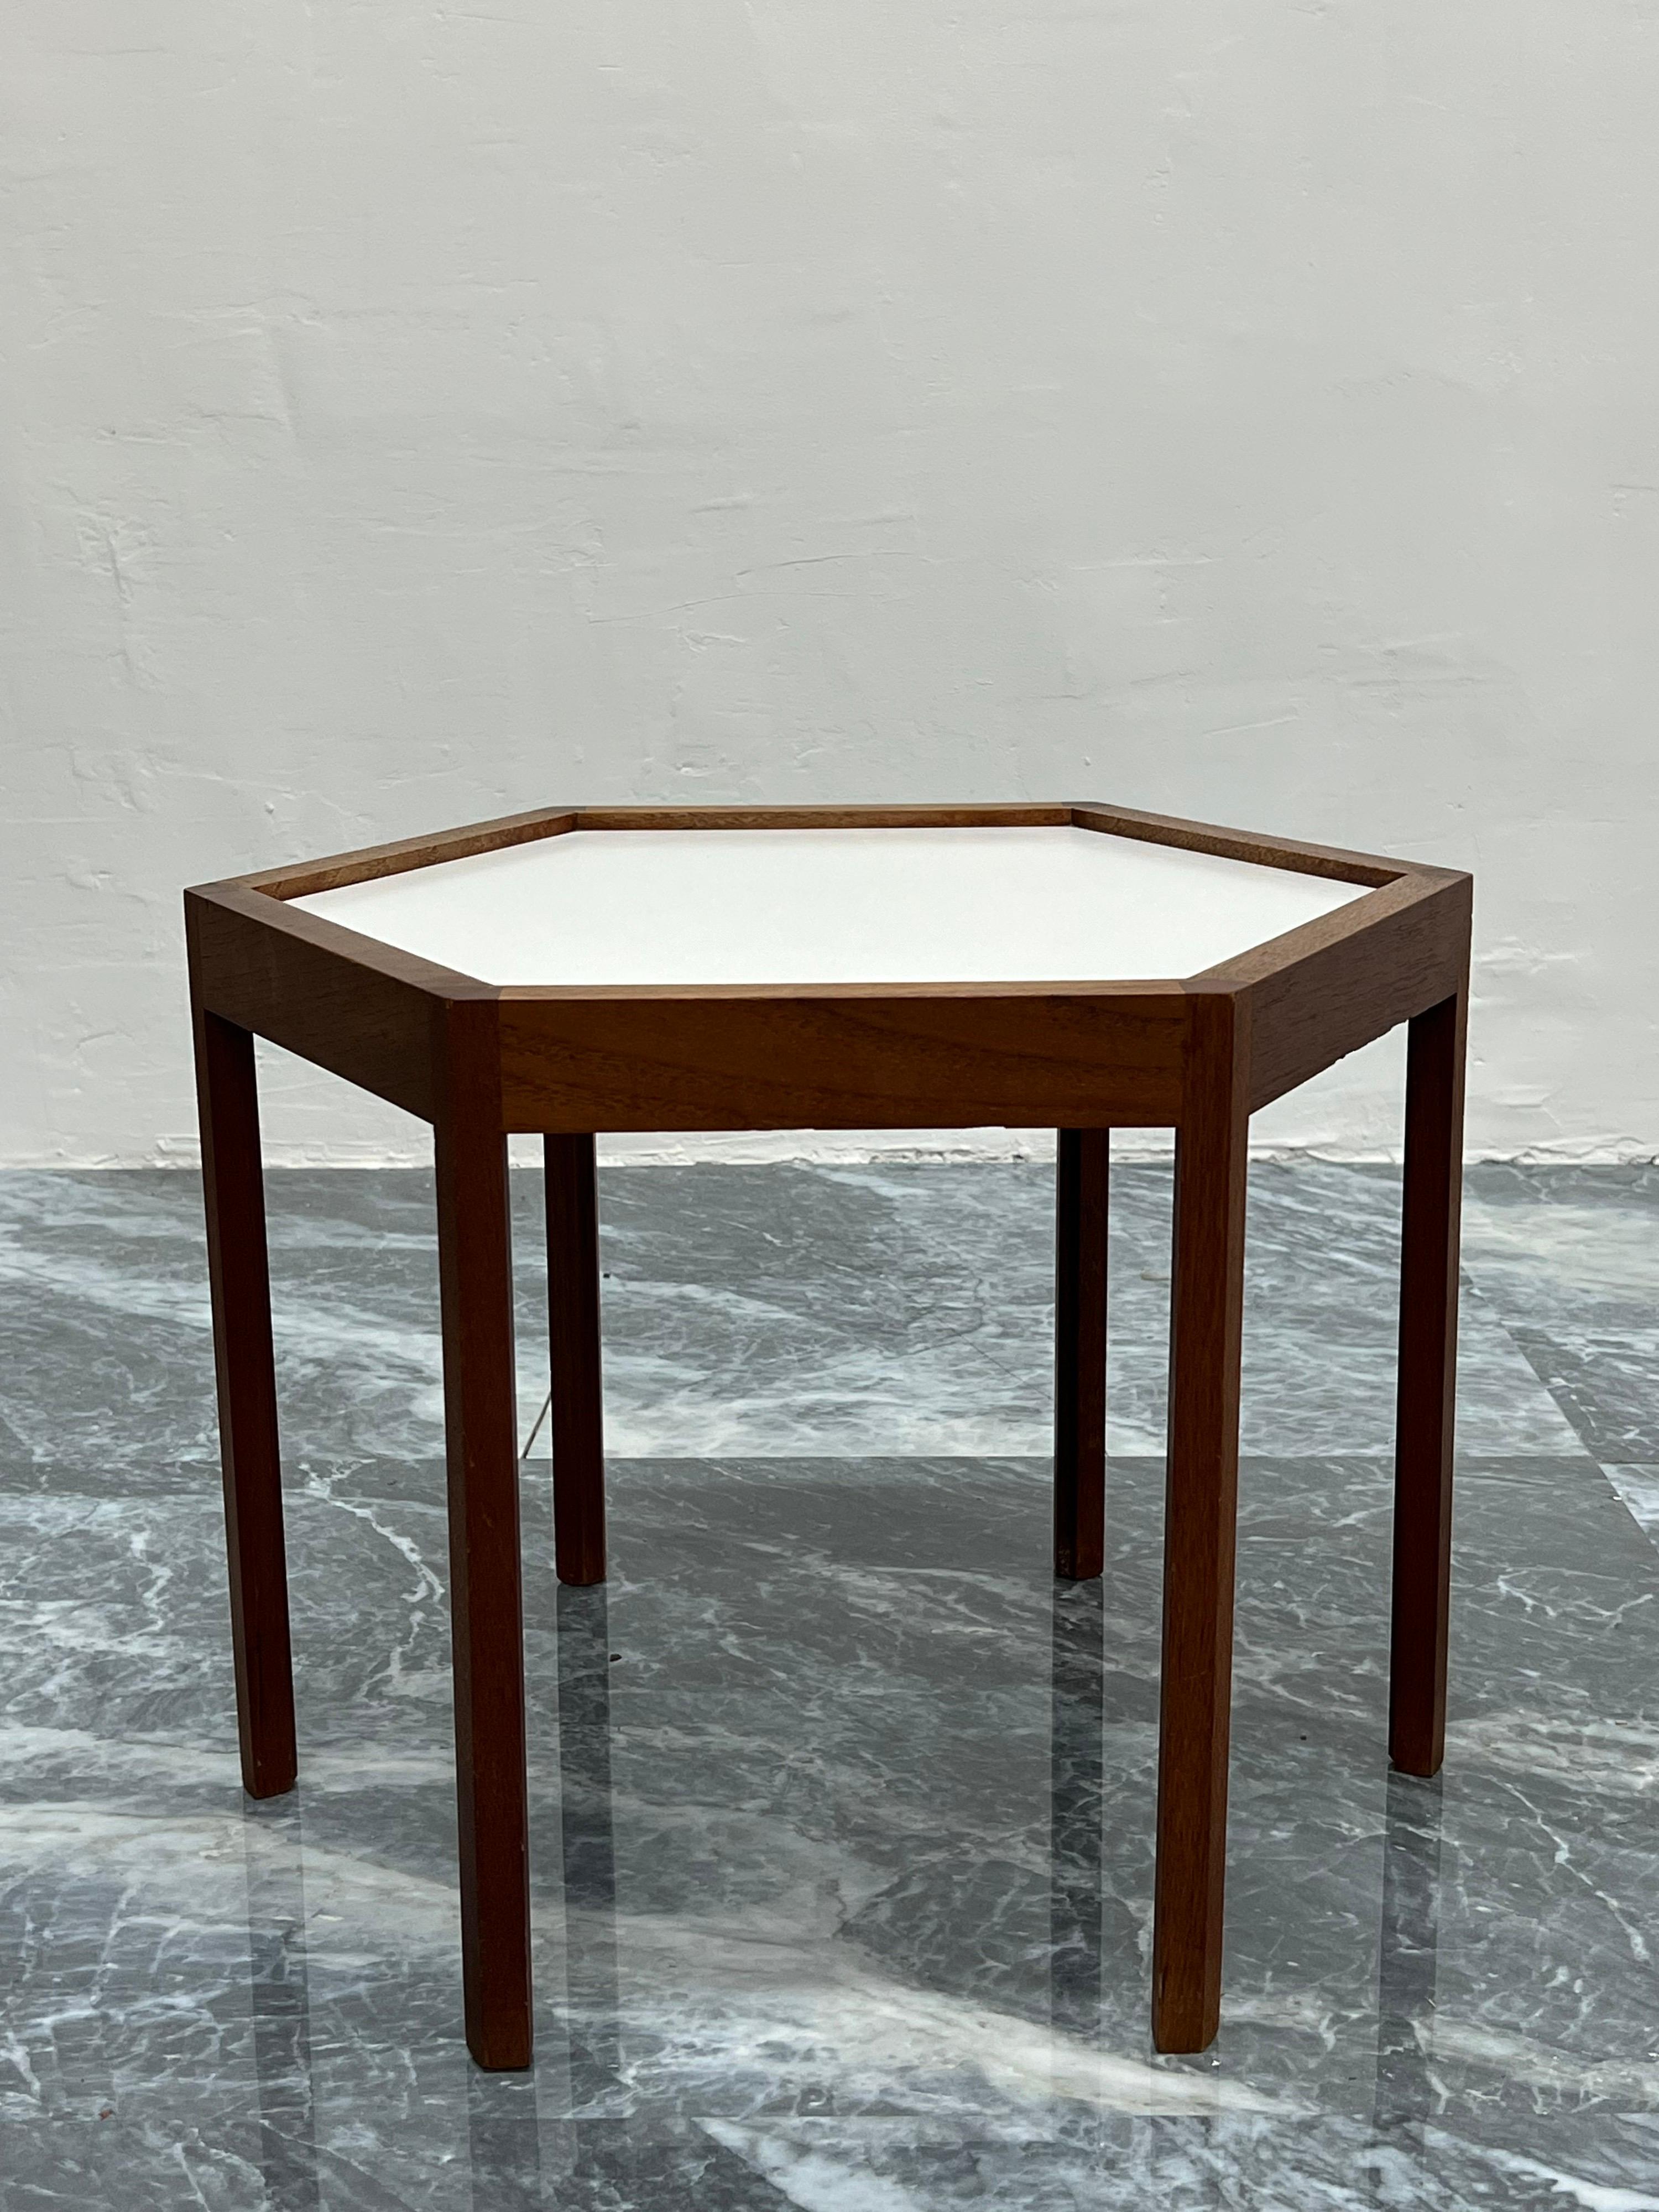 Danish modern side table with white laminate top and rosewood hexagonal frame by Hans C Andersen circa 1960s.